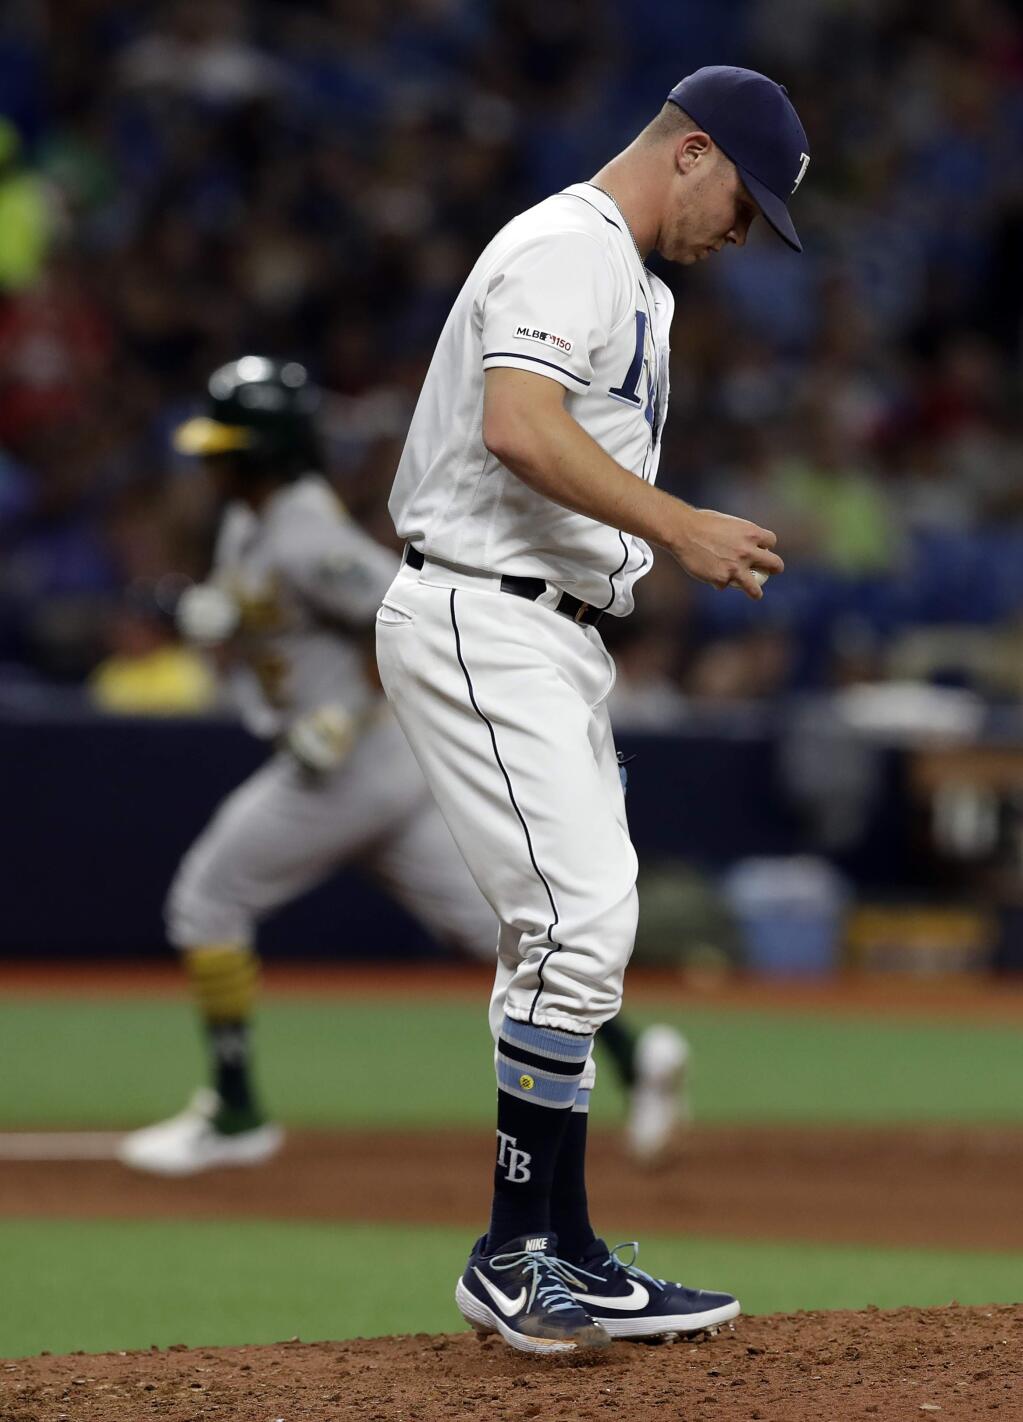 Tampa Bay Rays relief pitcher Emilio Pagan kicks the dirt as Oakland Athletics' Khris Davis runs around the bases after his home run during the sixth inning of a baseball game Tuesday, June 11, 2019, in St. Petersburg, Fla. (AP Photo/Chris O'Meara)